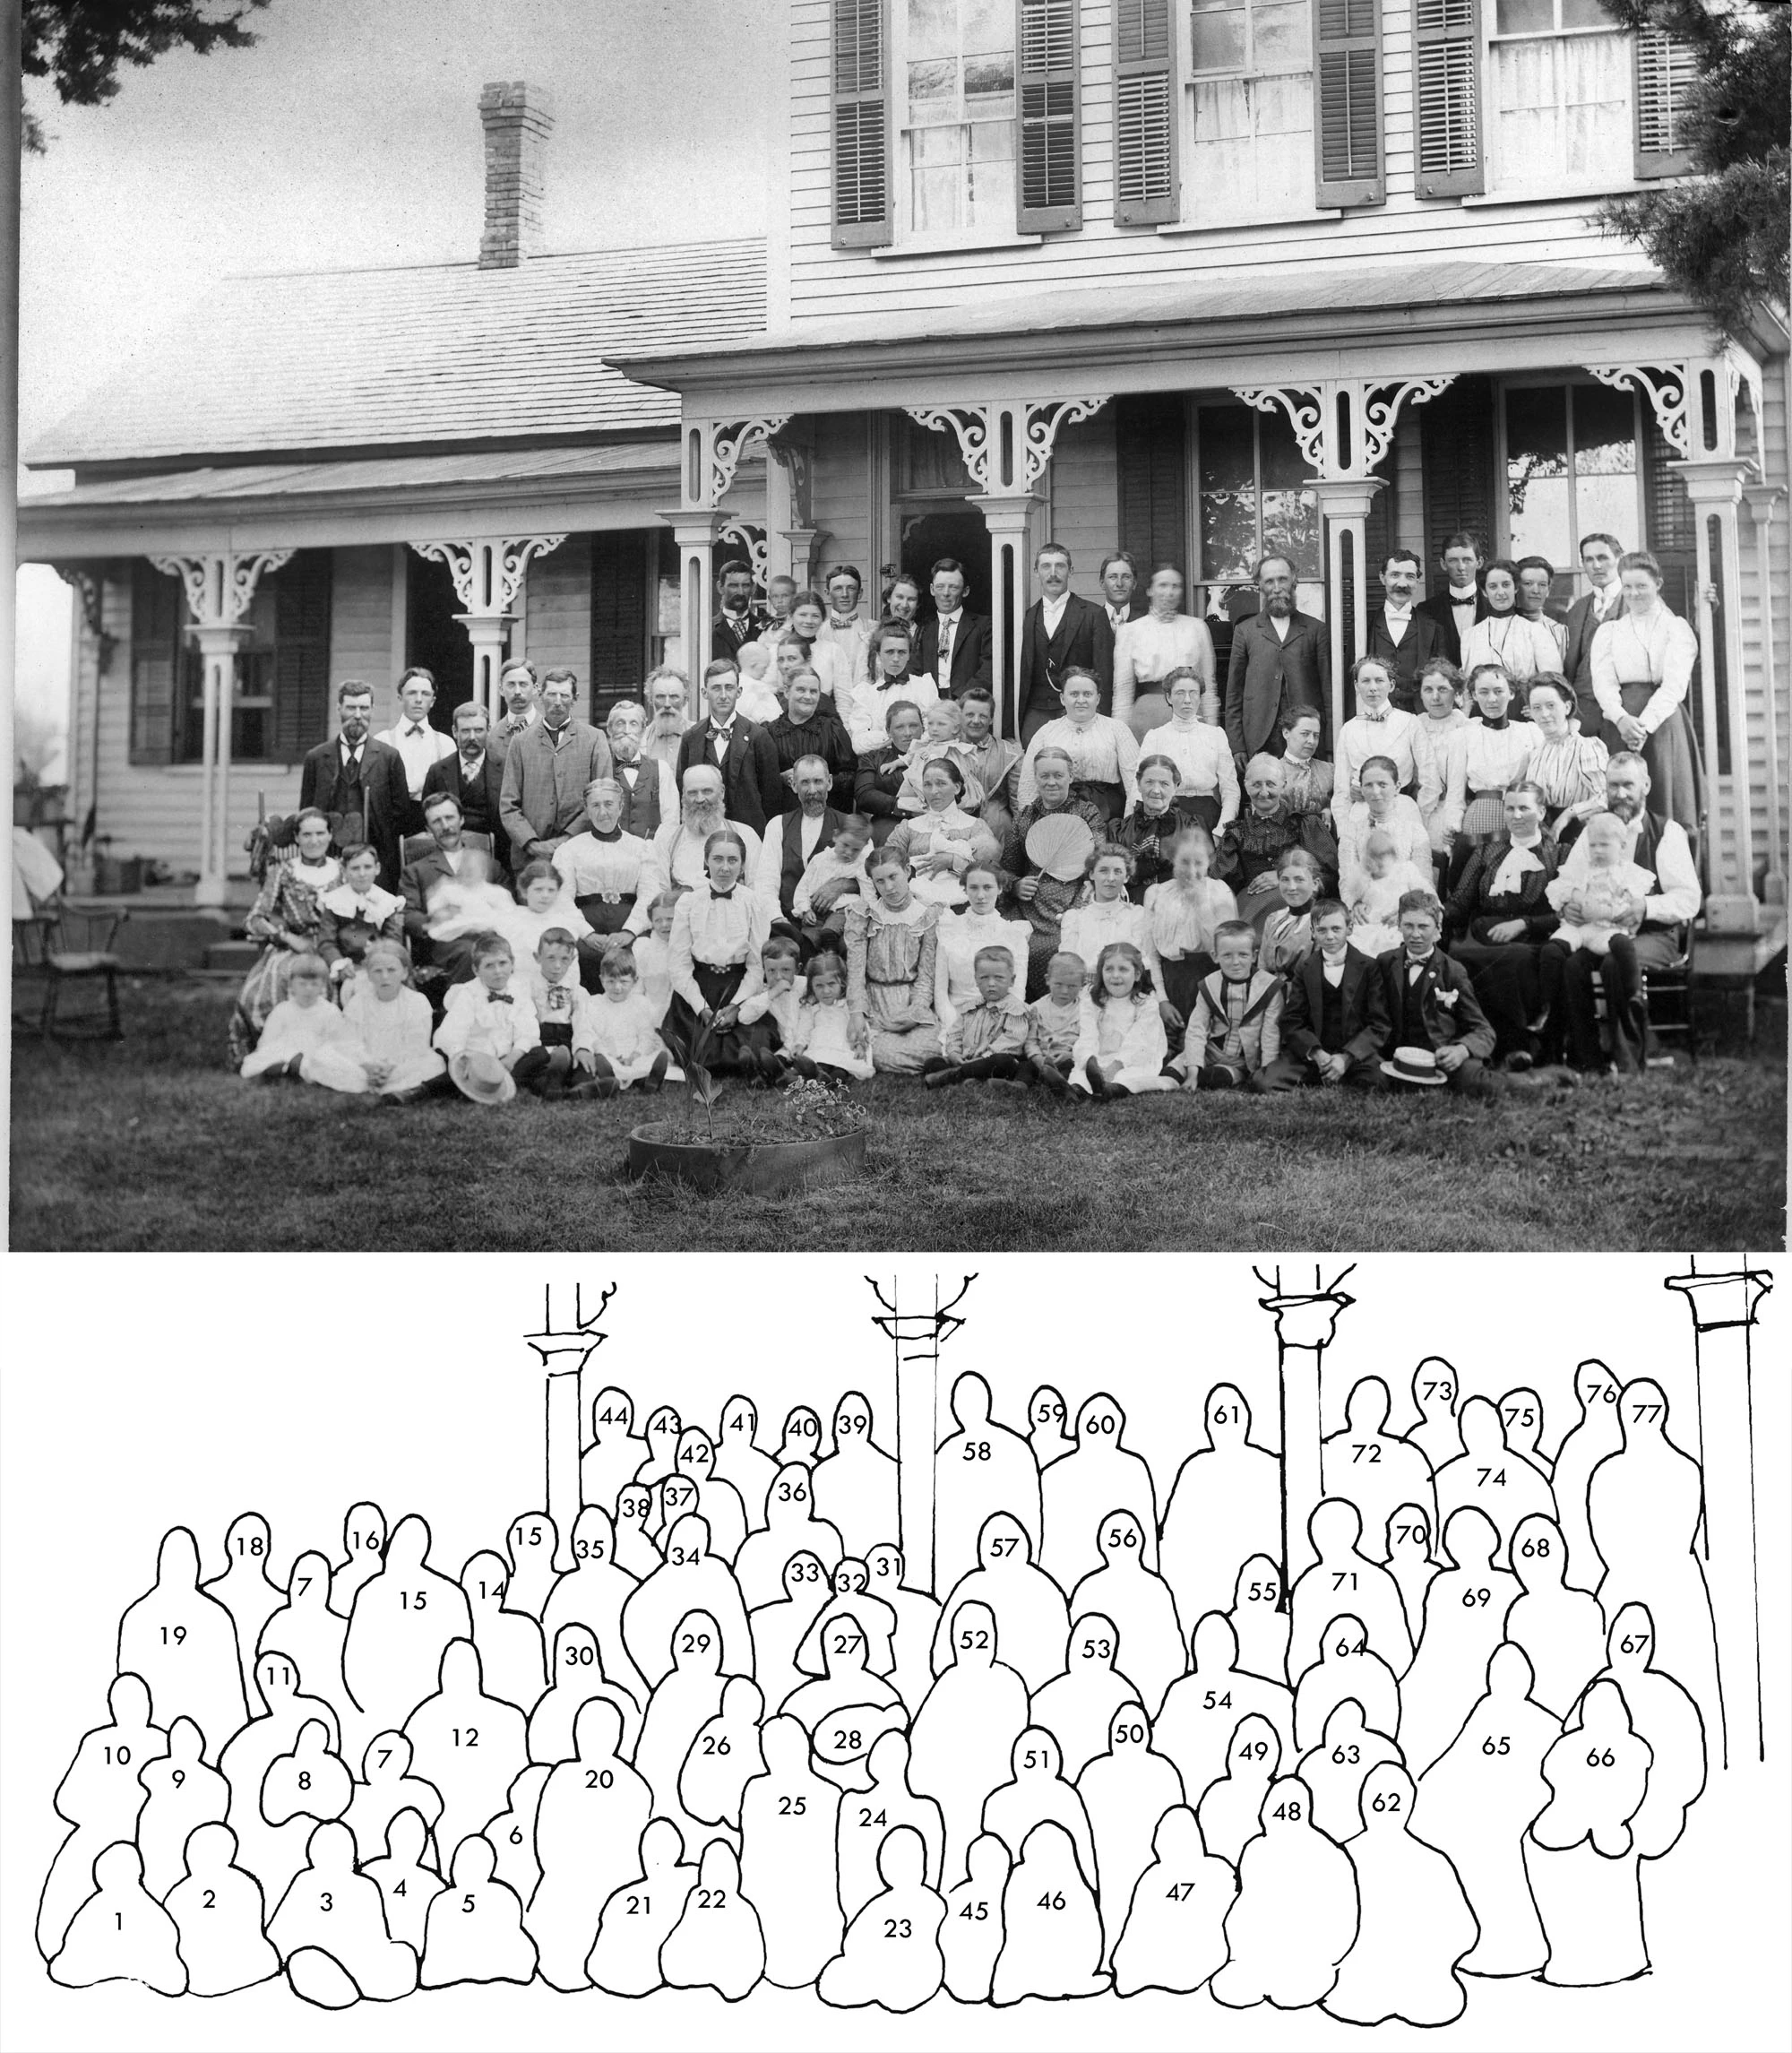 Group photo of over 70 people outside a two-story home.